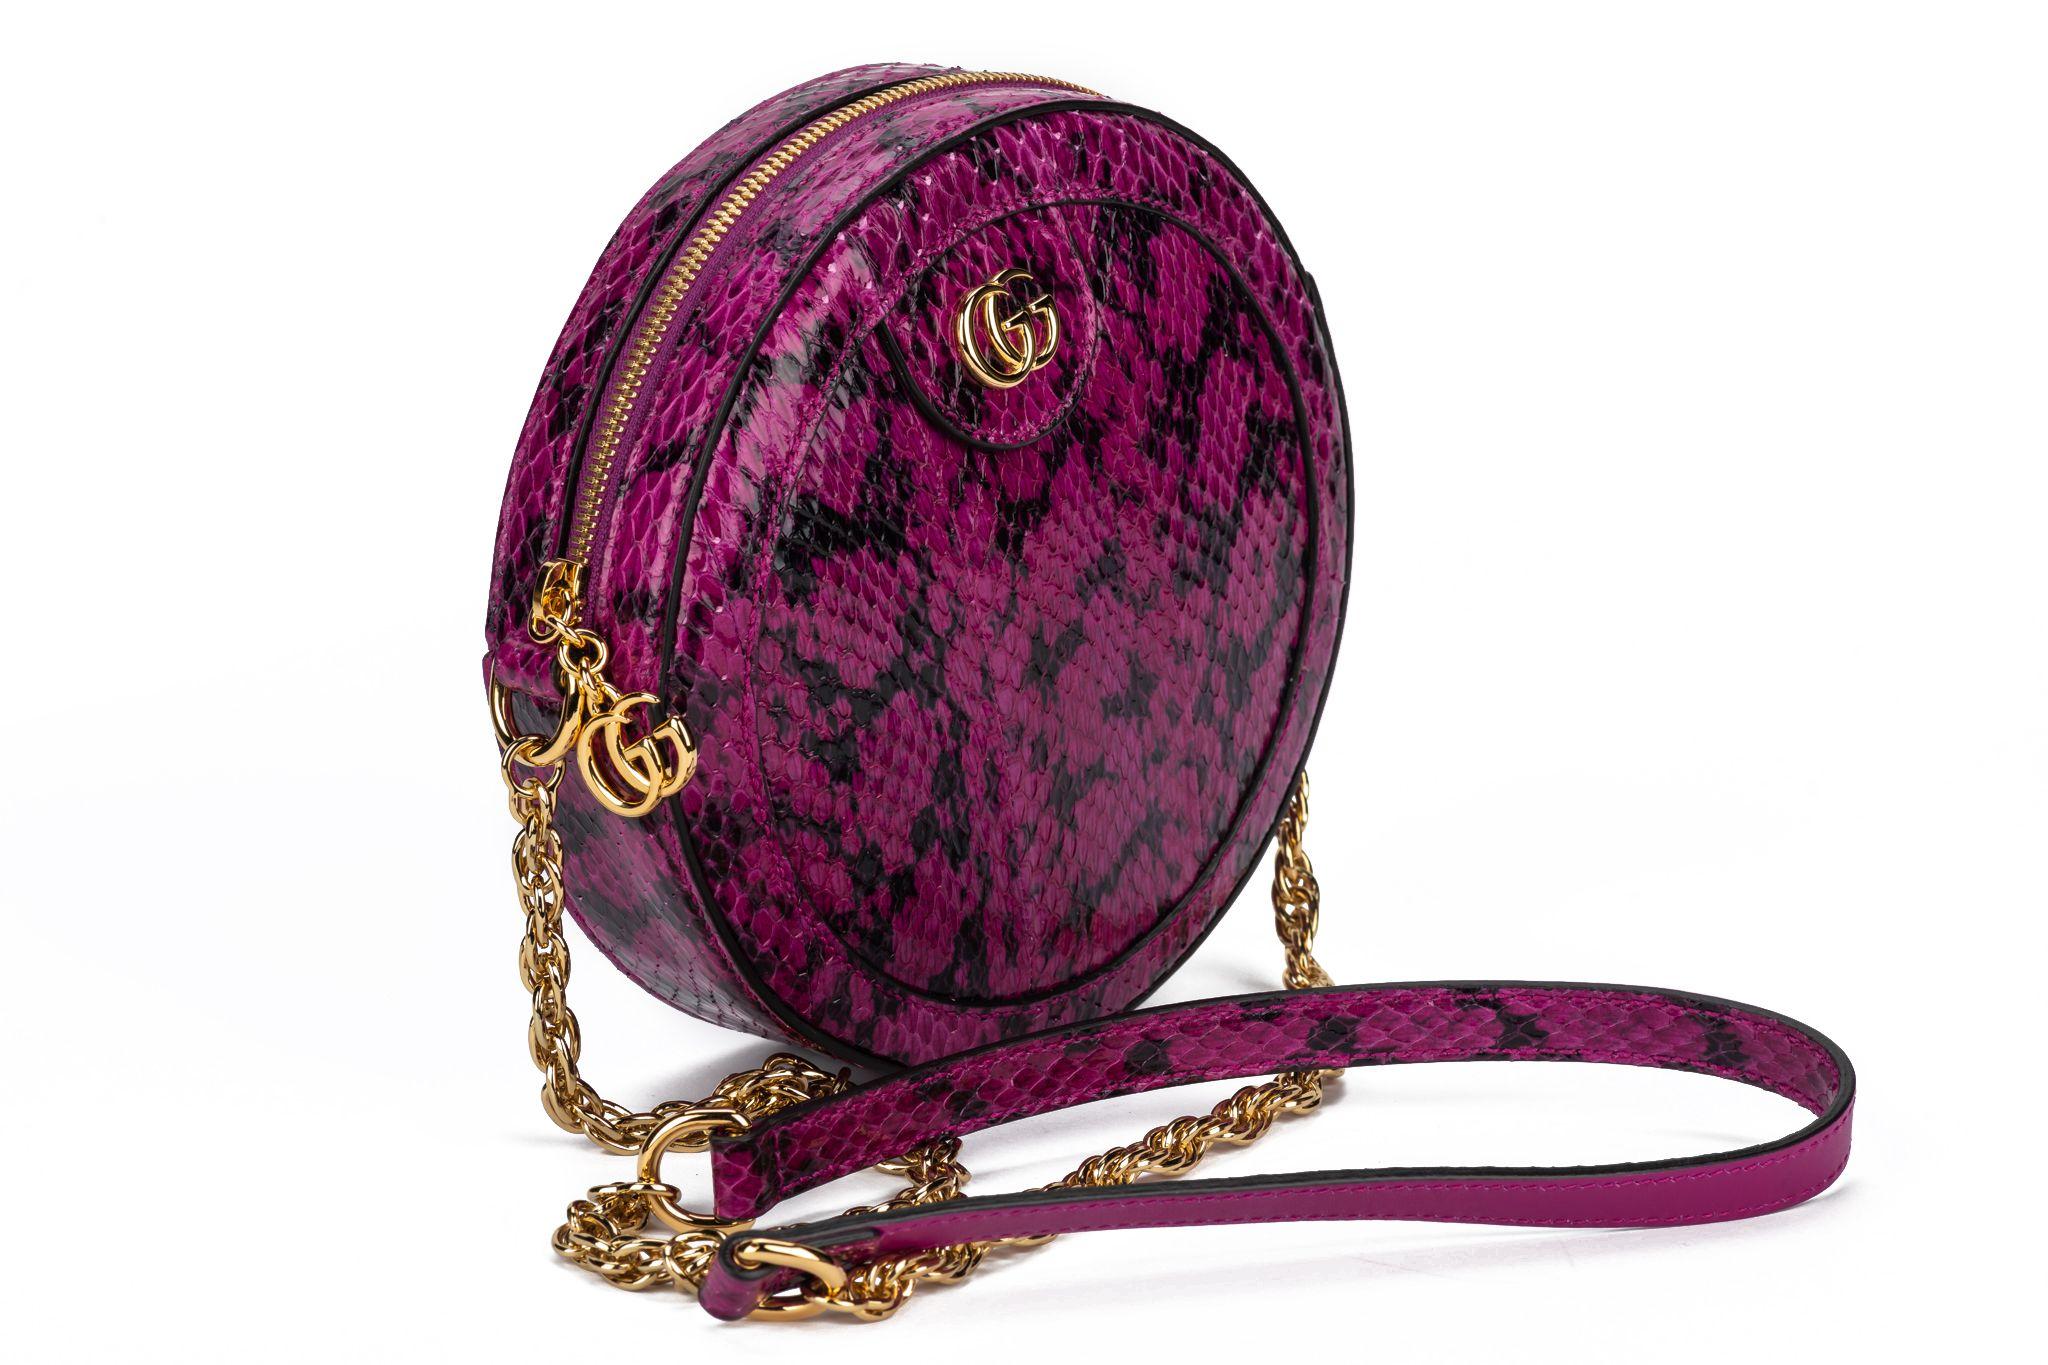 GUCCI Ophidia watersnake Mini Round Shoulder Bag in the color purple. The shoulder strap measures 23 inches and the interior is made of beige leather. The bag comes with the original box and dustcover. New in unworn condition. 